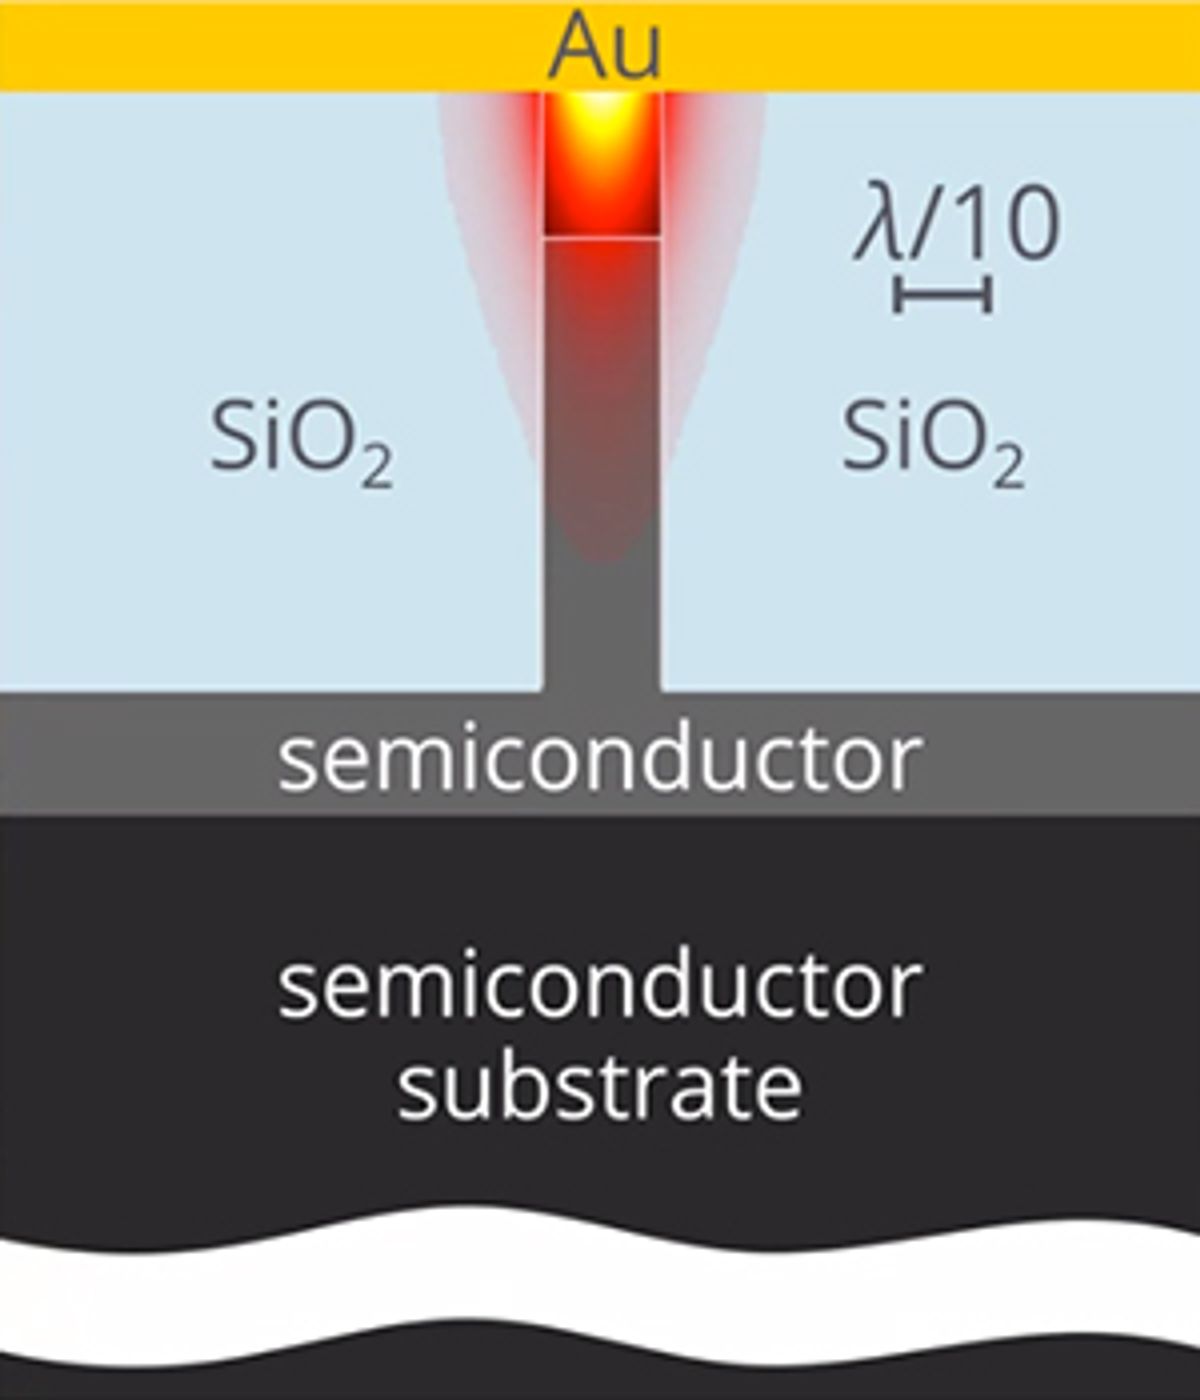 Nanoscale Thermal Interfaces Eliminate Overheating in Future Photonic Circuits